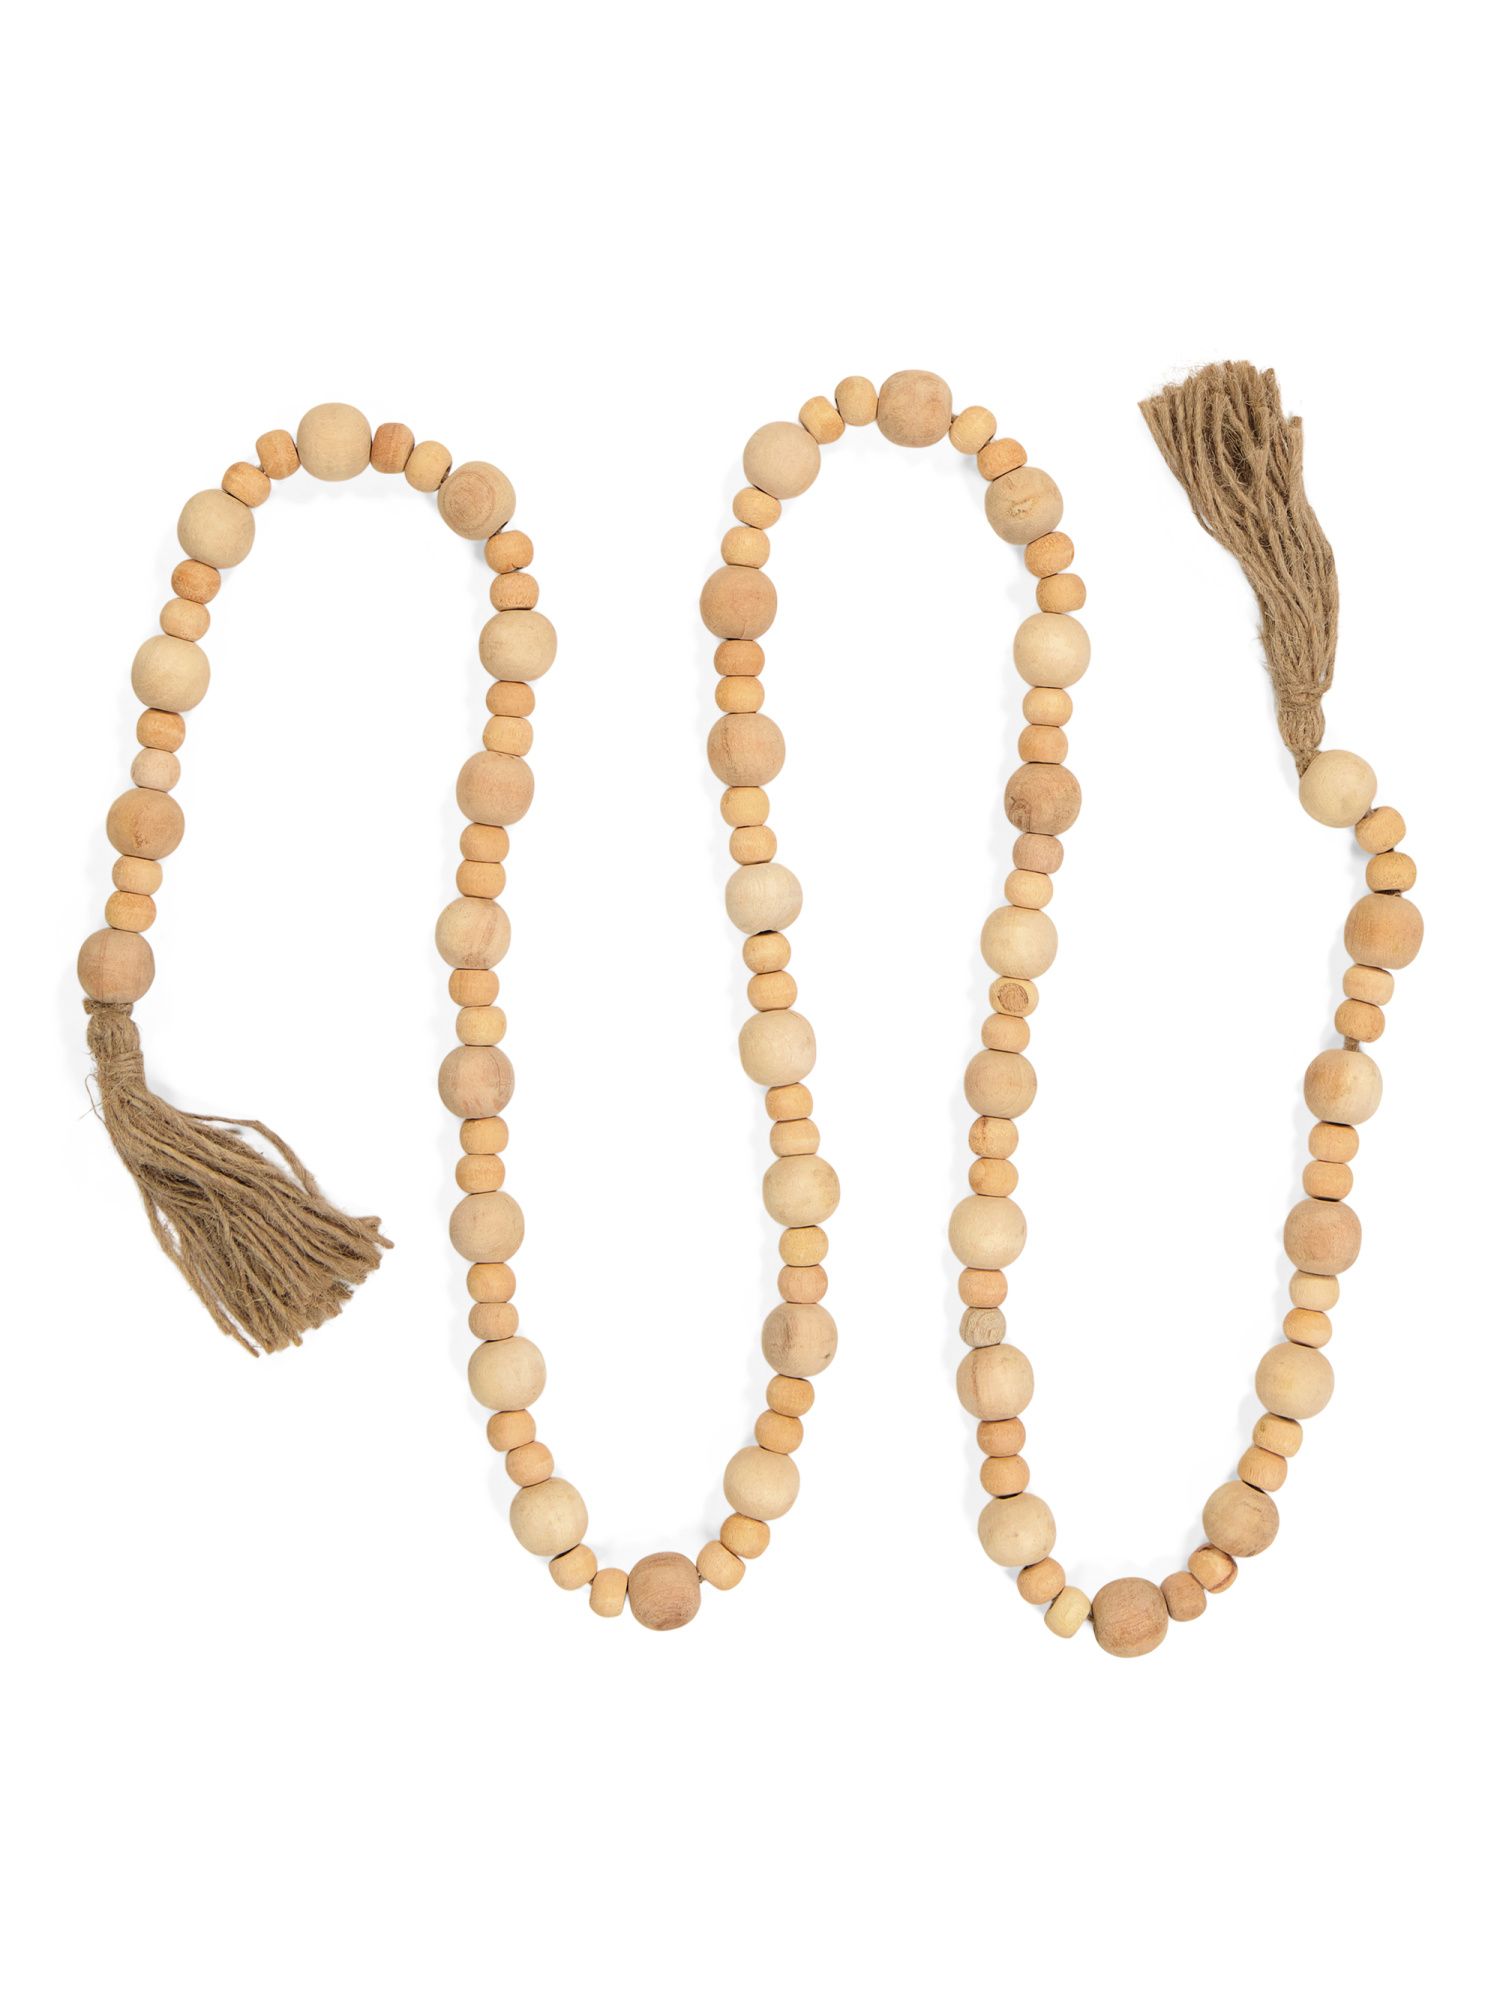 6ft Garland With Distressed Beads | Now & Wow! | Marshalls | Marshalls